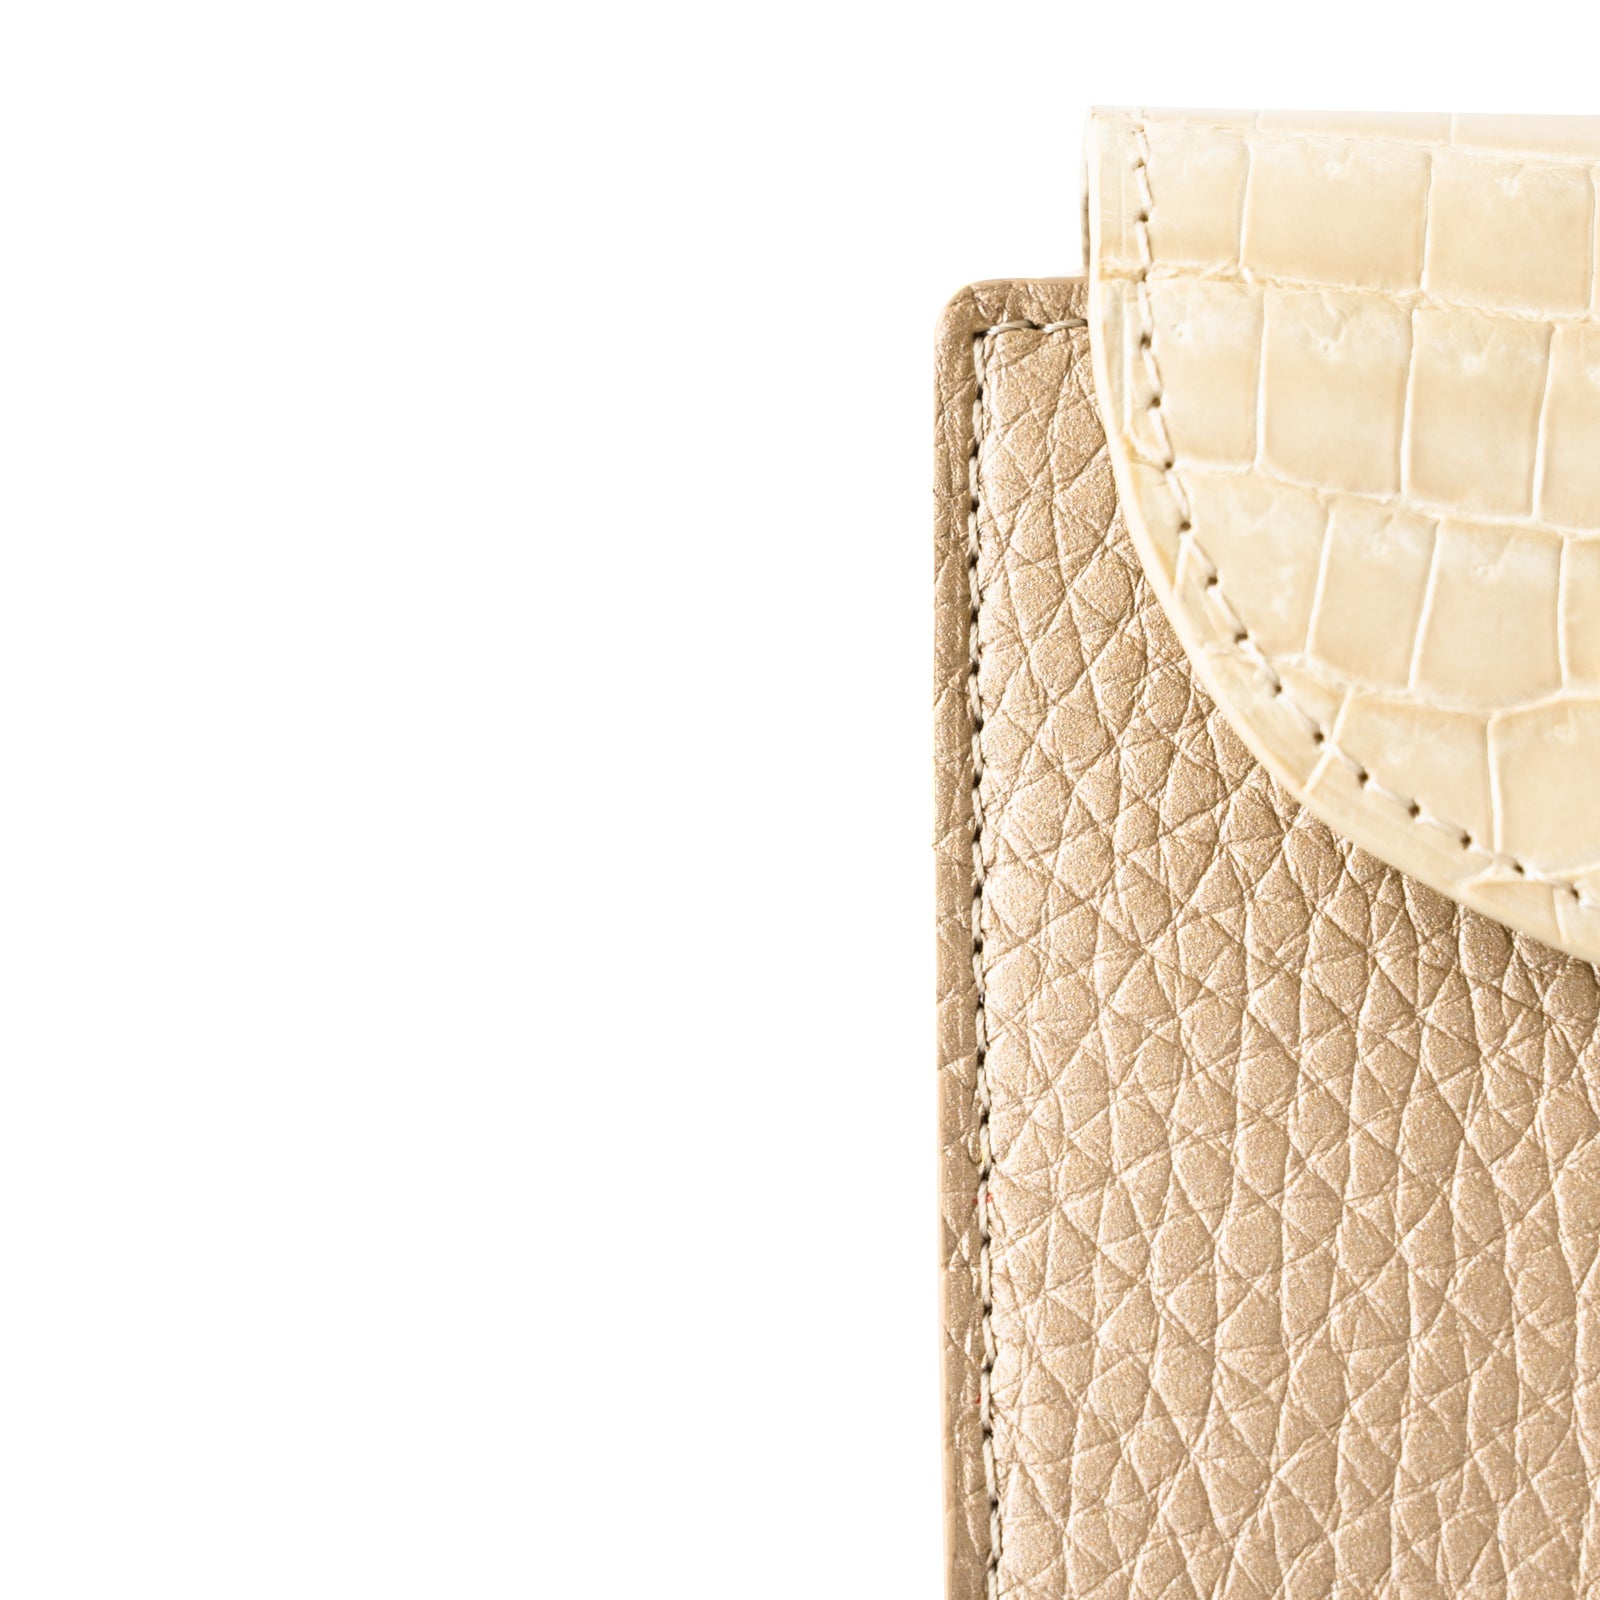 [Limited Item] Bi-fold Wallet Eclair Taurillon Clemence Crocodile Combination / Champagne Gold 